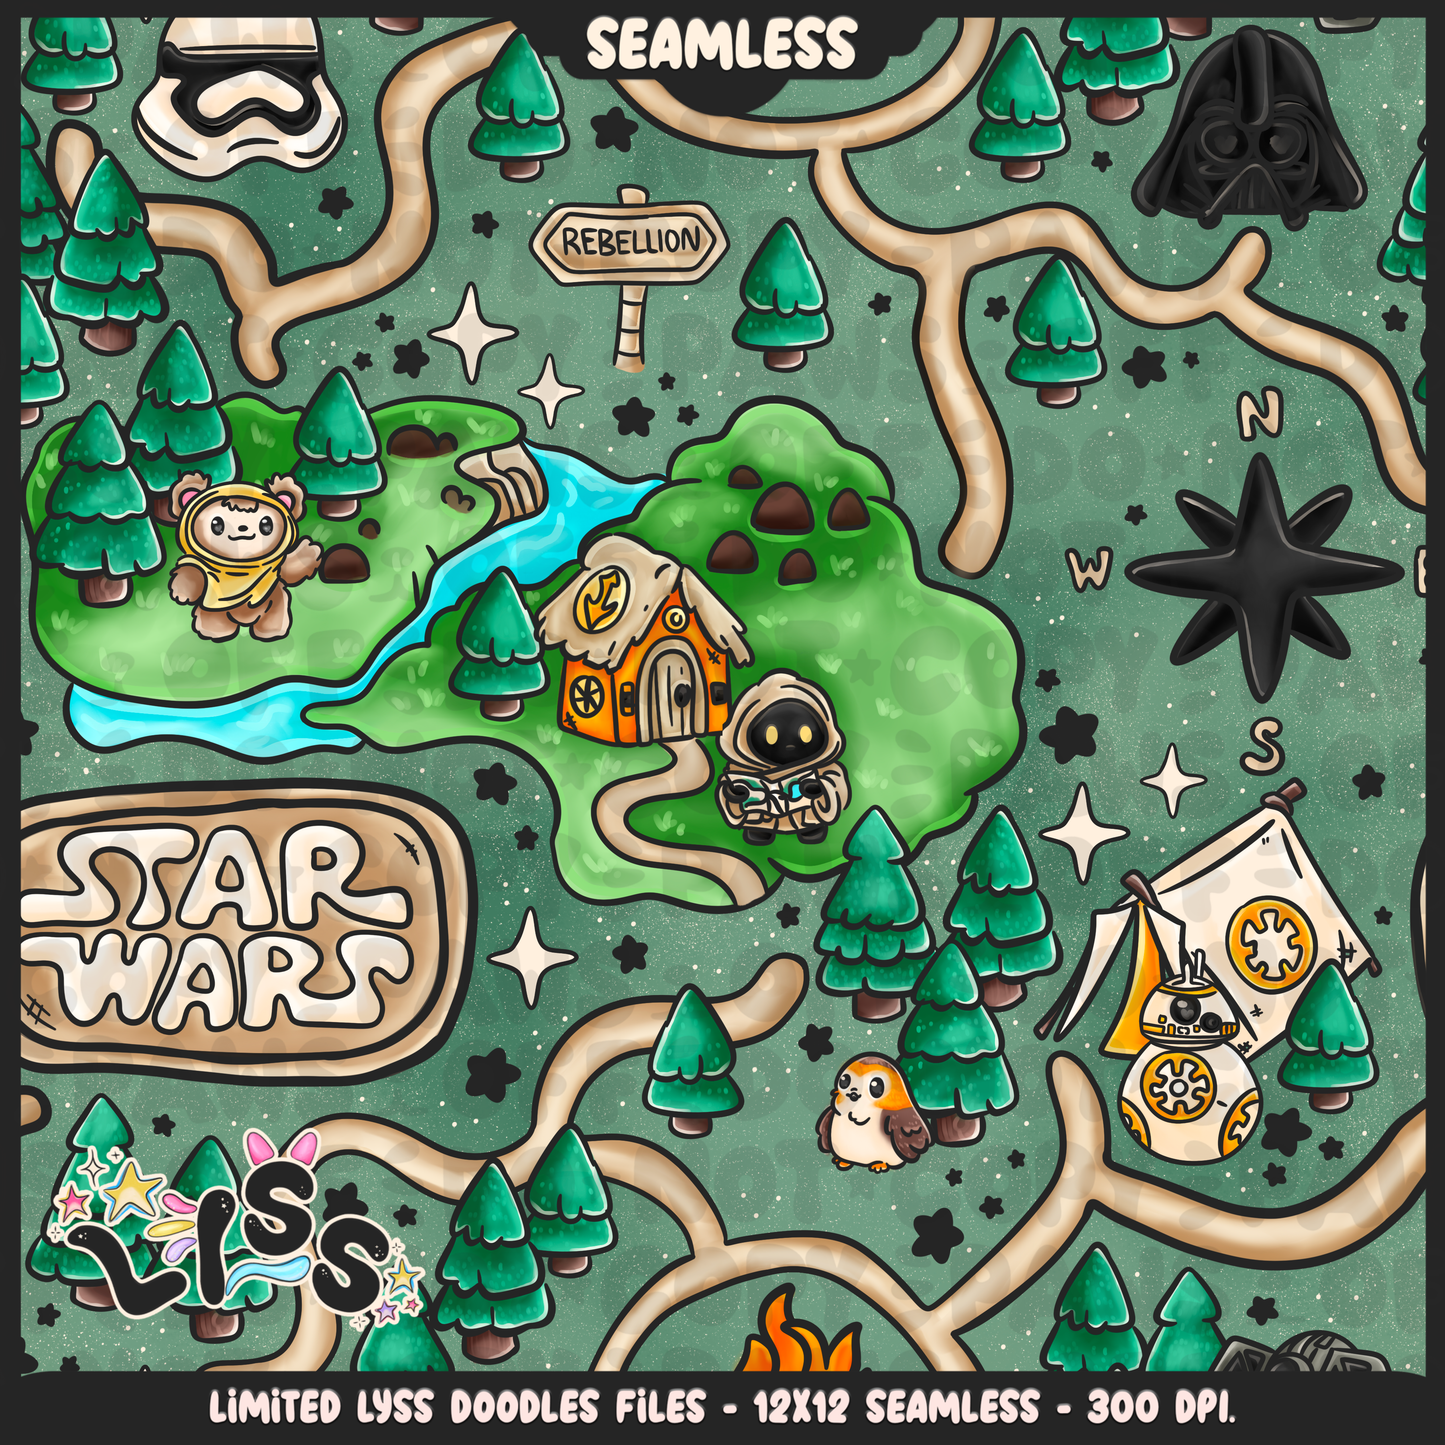 2024 - Lyss Doodles - Seamless - Mains - May Fourth Event - Adventure Wars - 24LD043